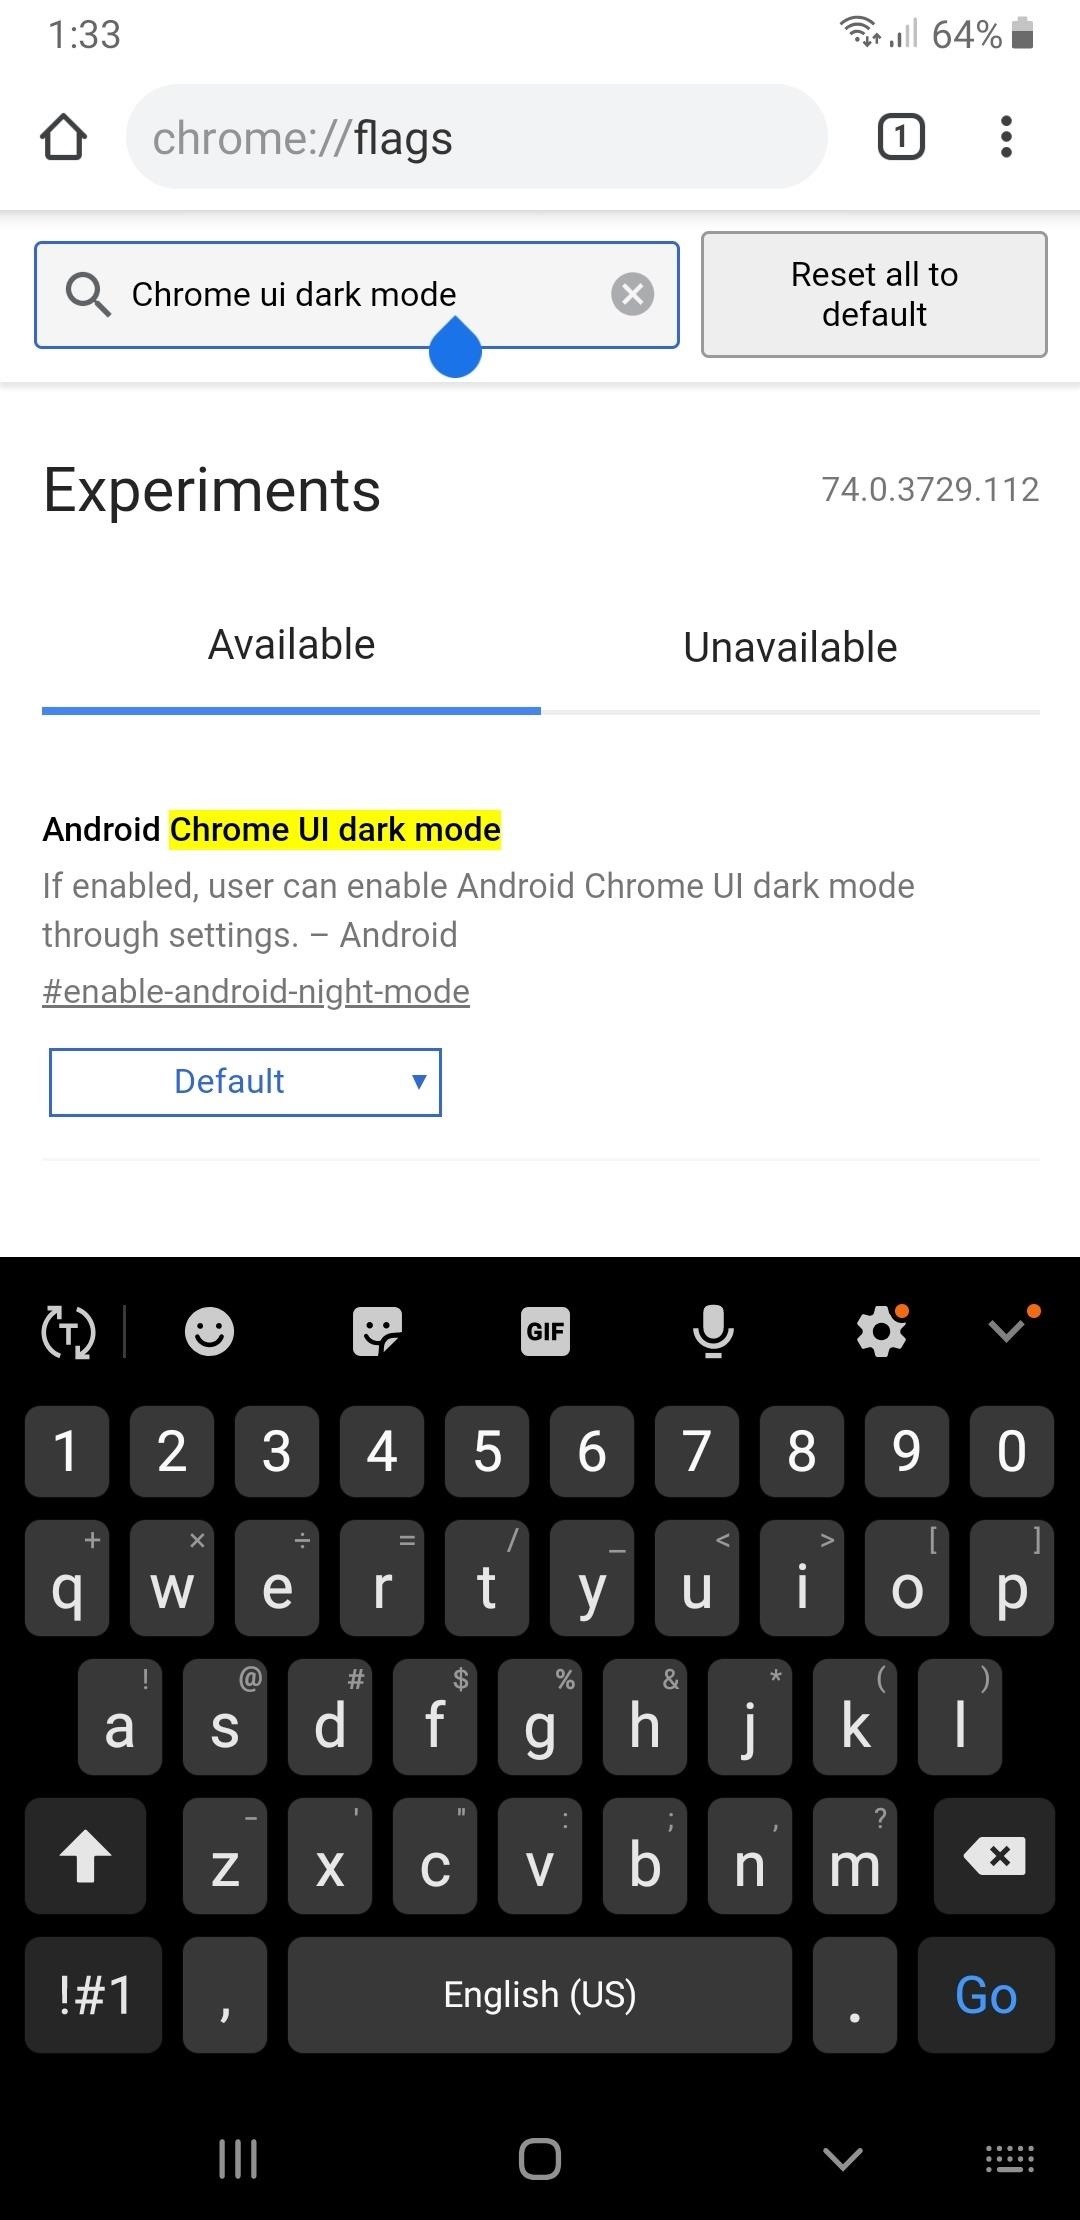 enable-dark-mode-chrome-for-android.w1456.jpg